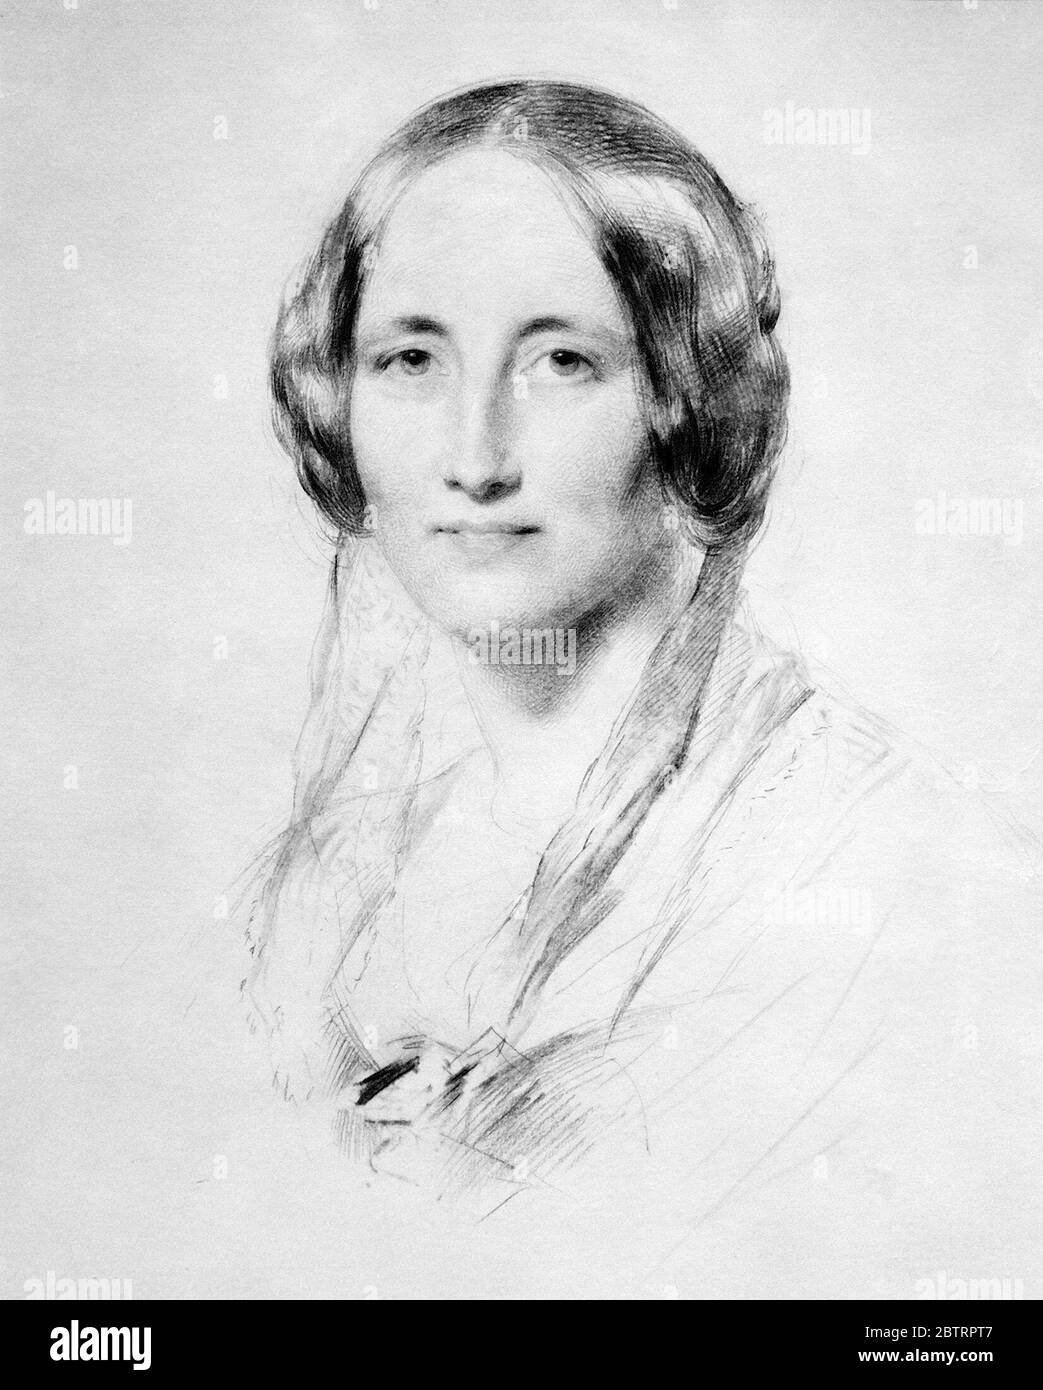 Elizabeth Cleghorn Gaskell, (née Stevenson; 1810-1865), portrait by George Richmond, chalk, 1851. Elizabeth Gaskell, often referred to as Mrs Gaskell, was an English novelist and short story writer during the Victorian era. Stock Photo